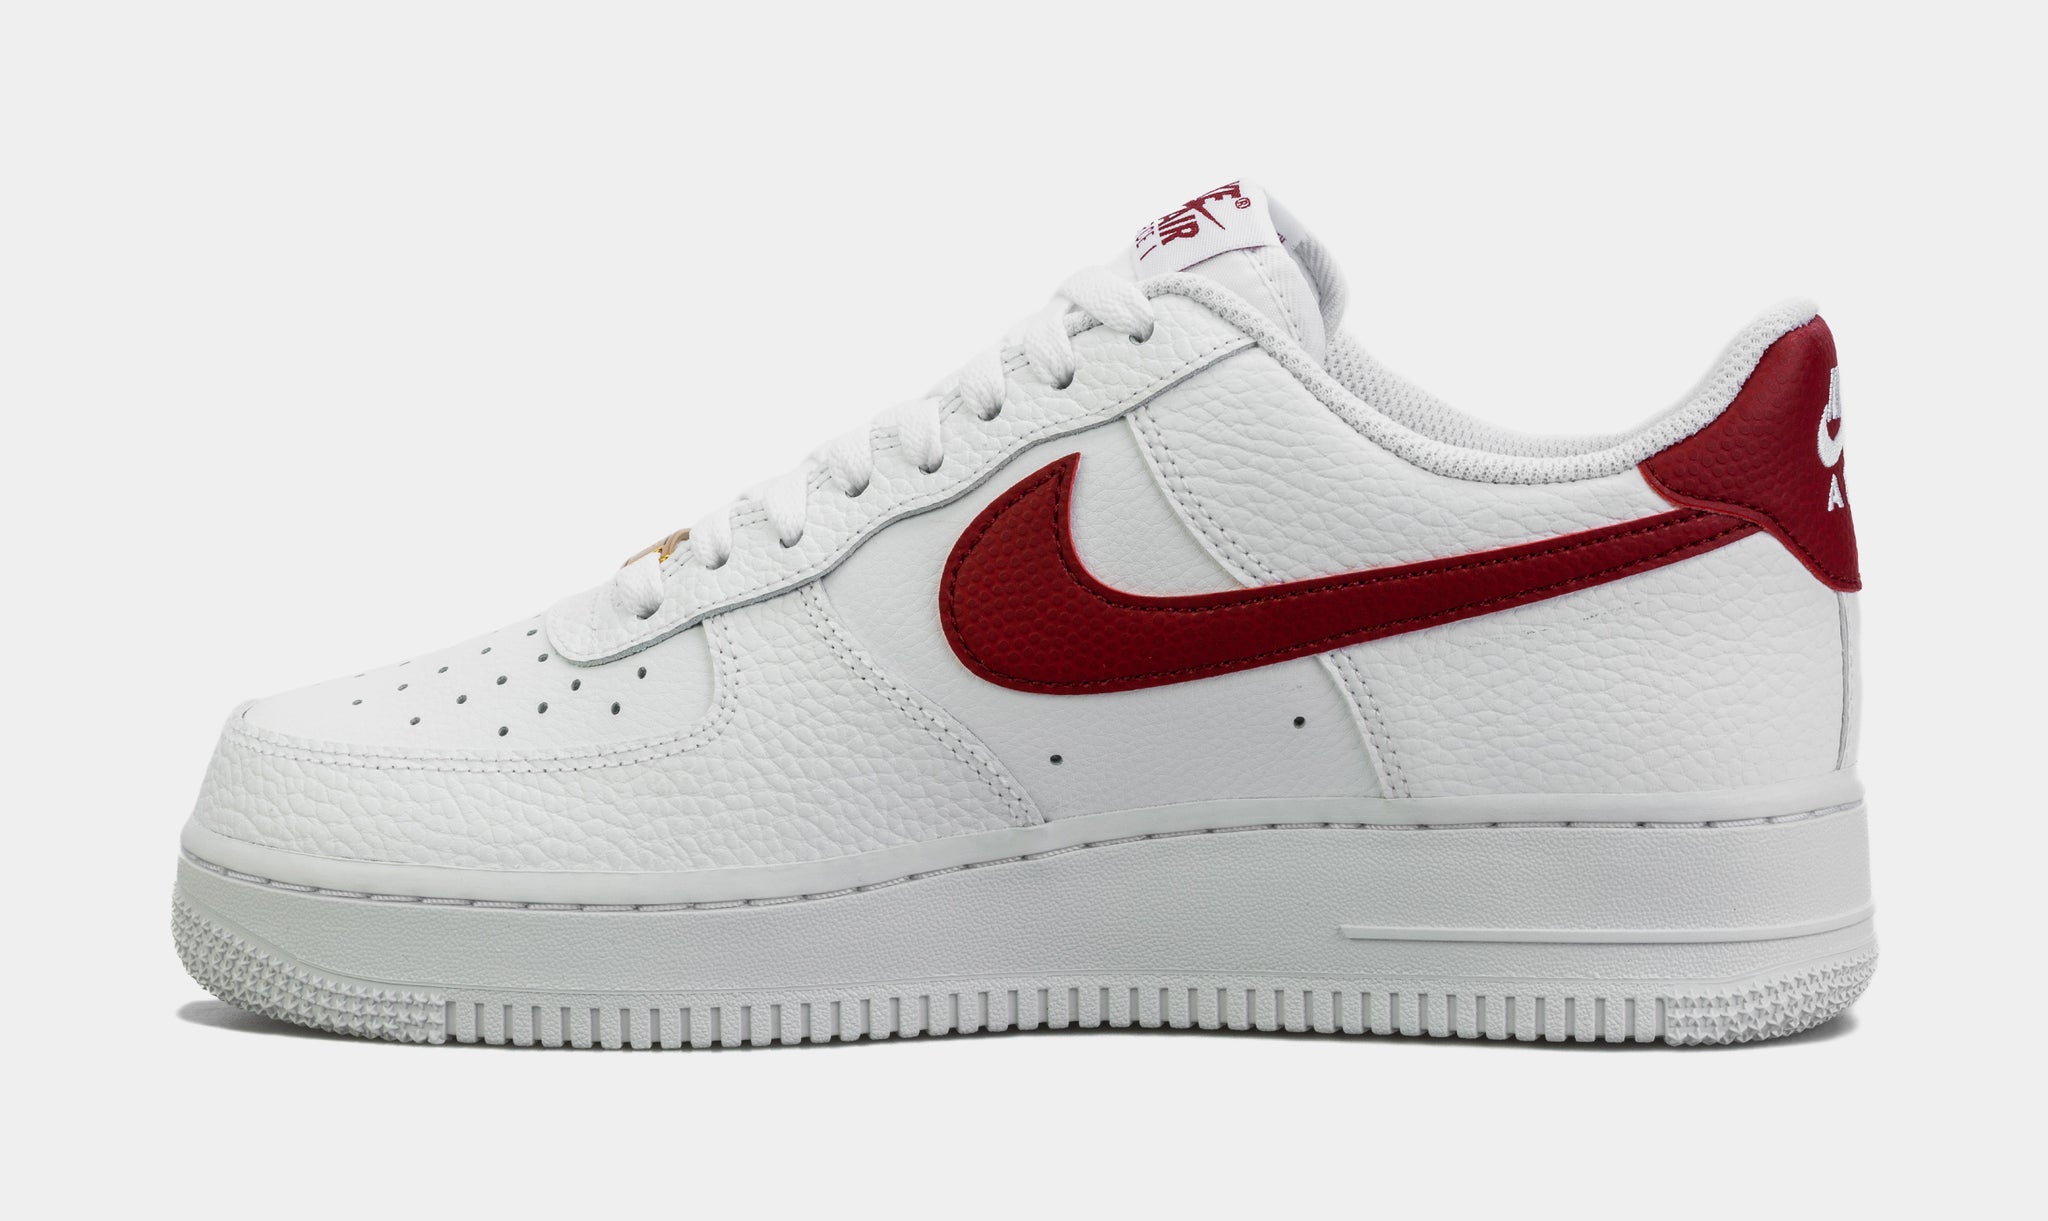 Nike Air Force 1 07 Mens Lifestyle Shoes White Red CZ0326-100